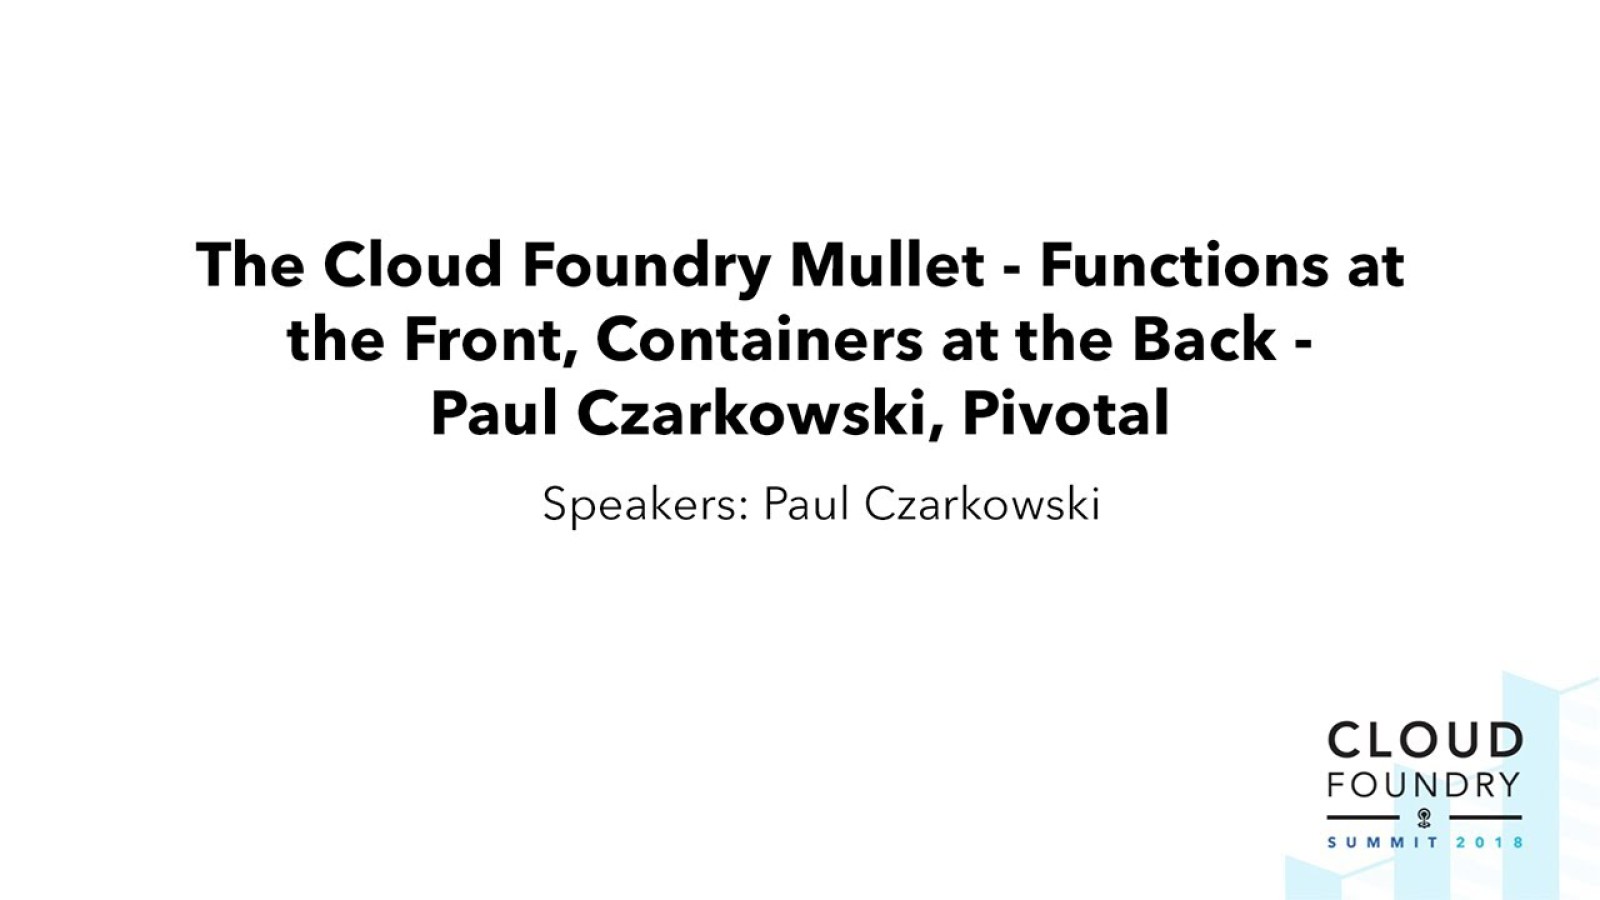 The Cloud Foundry Mullet - Functions at the Front, Containers at the Back